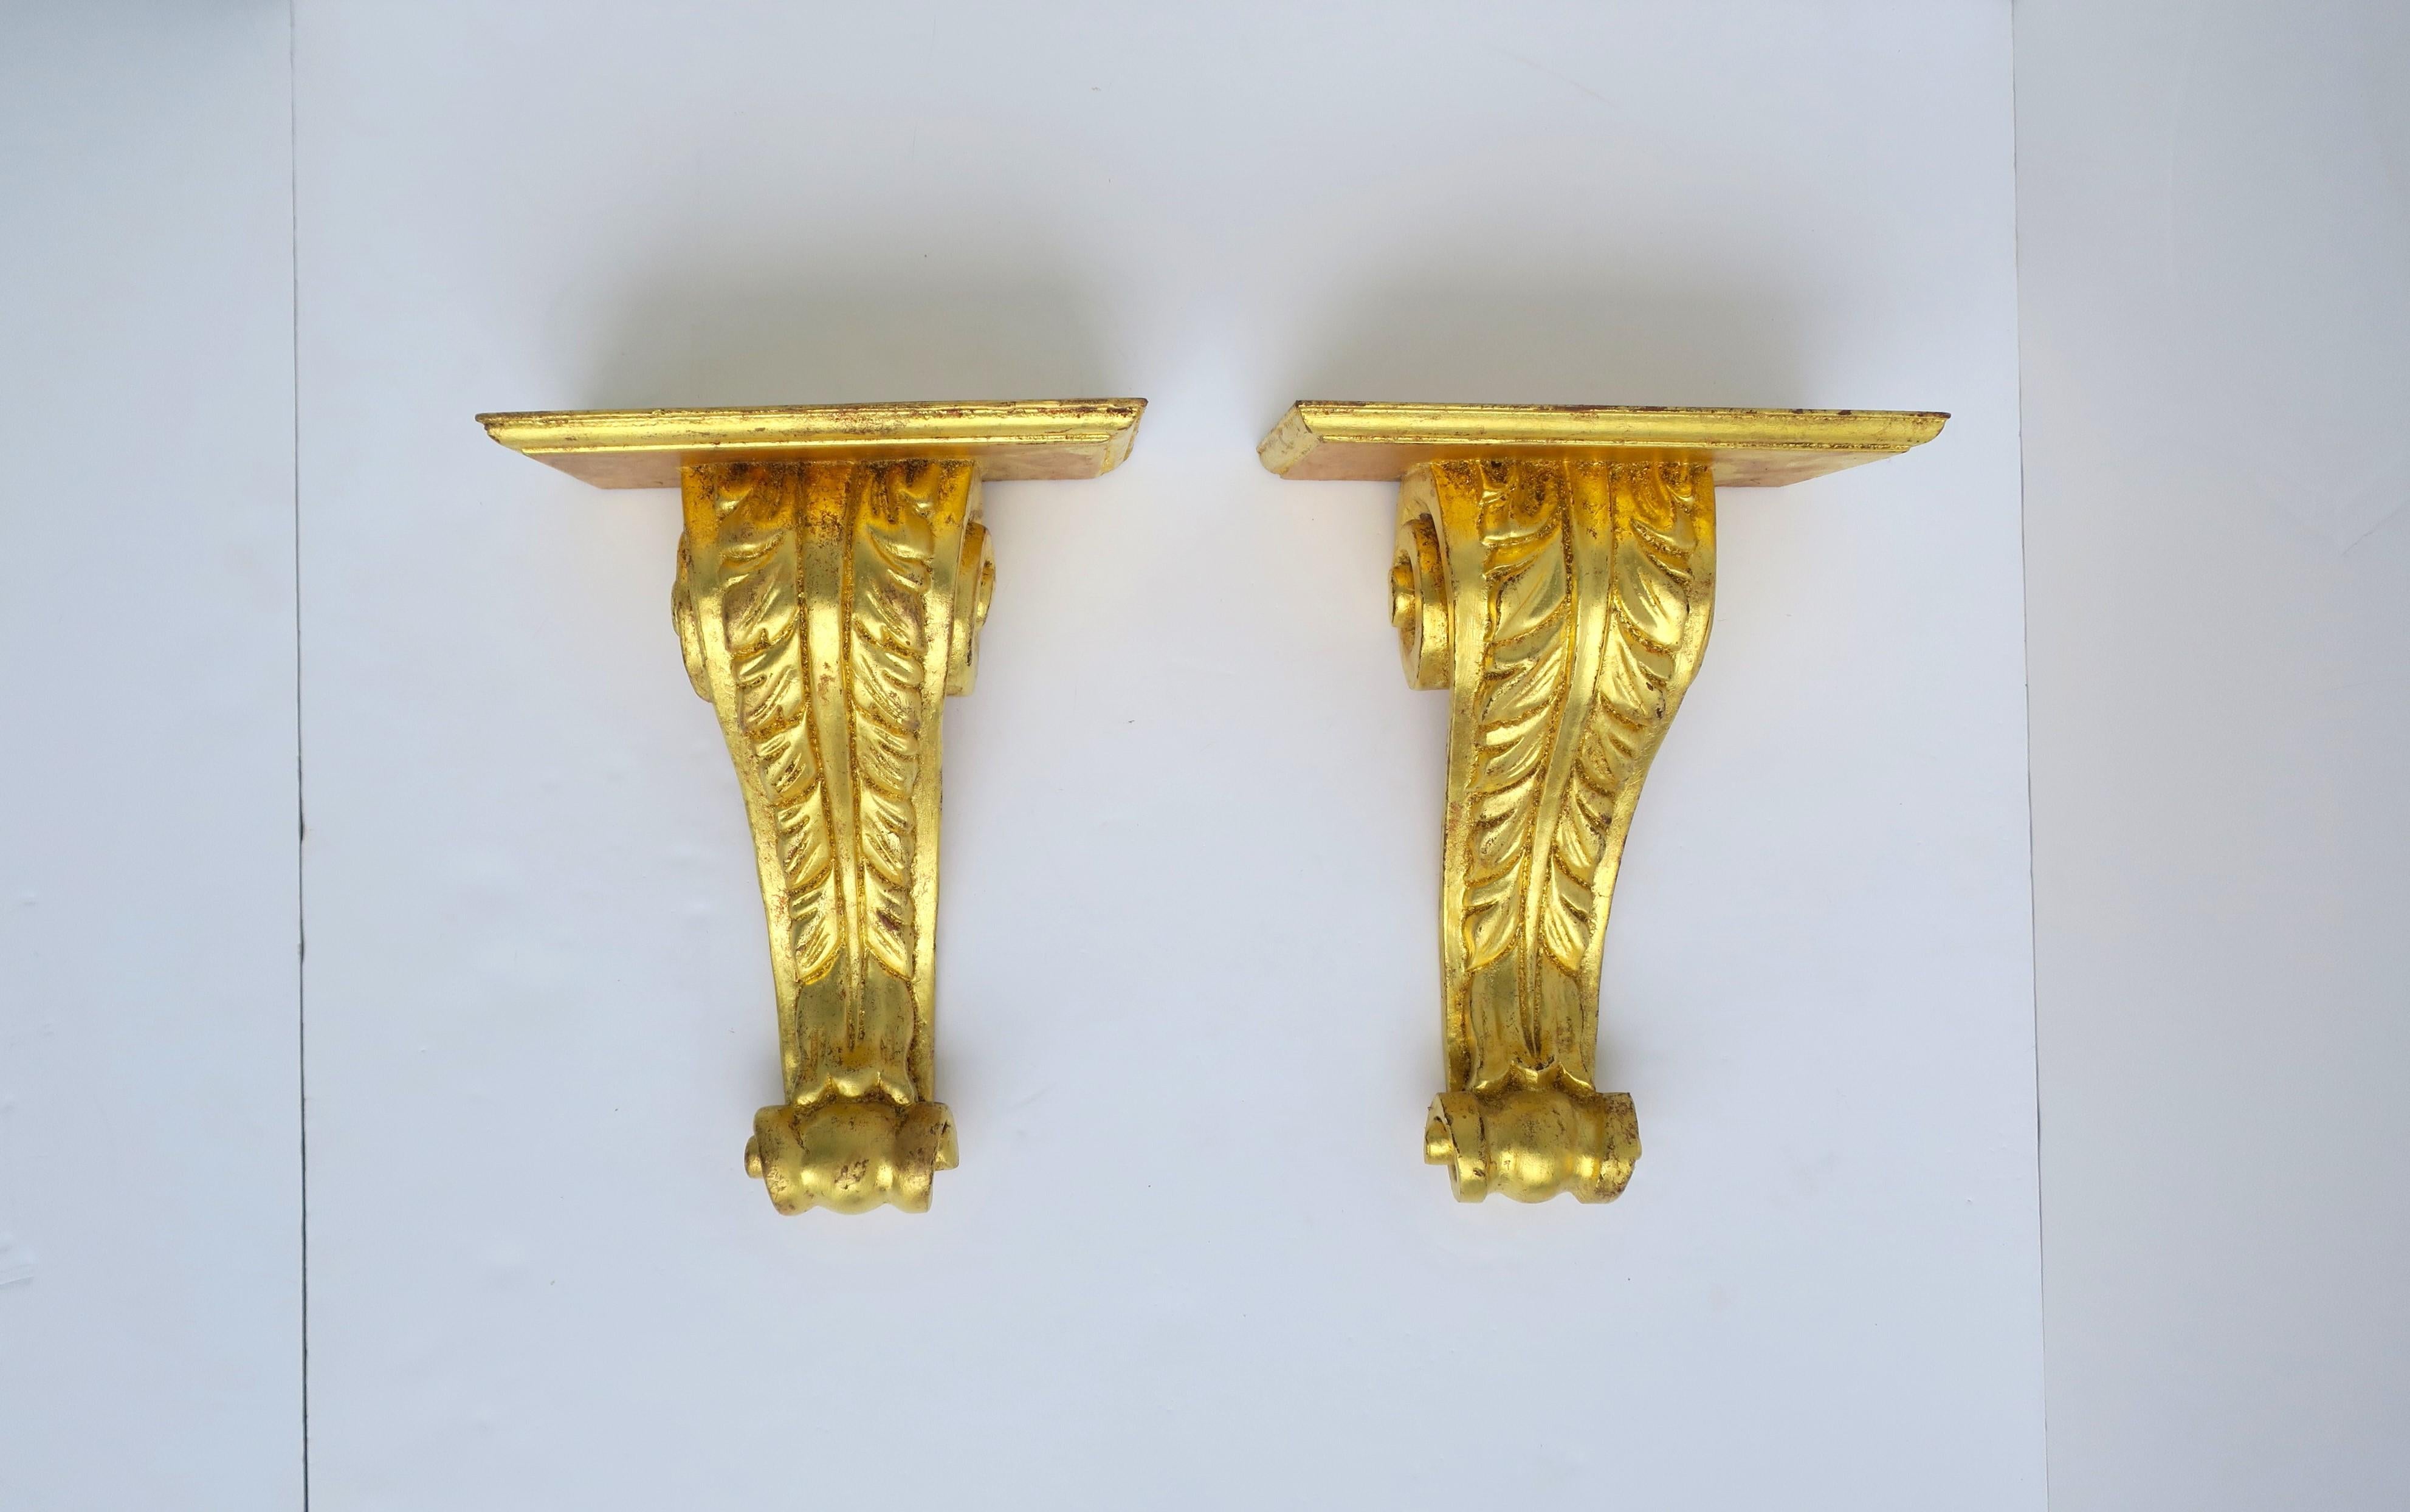 A beautiful pair of Italian gold gilt giltwood gold-leaf wall shelves, circa mid-20th century, Italy. Pair have rectangular shelf with acanthus leaf design and scrolled base. Marked 'Made in Italy' on the back of both as shown in last two images.